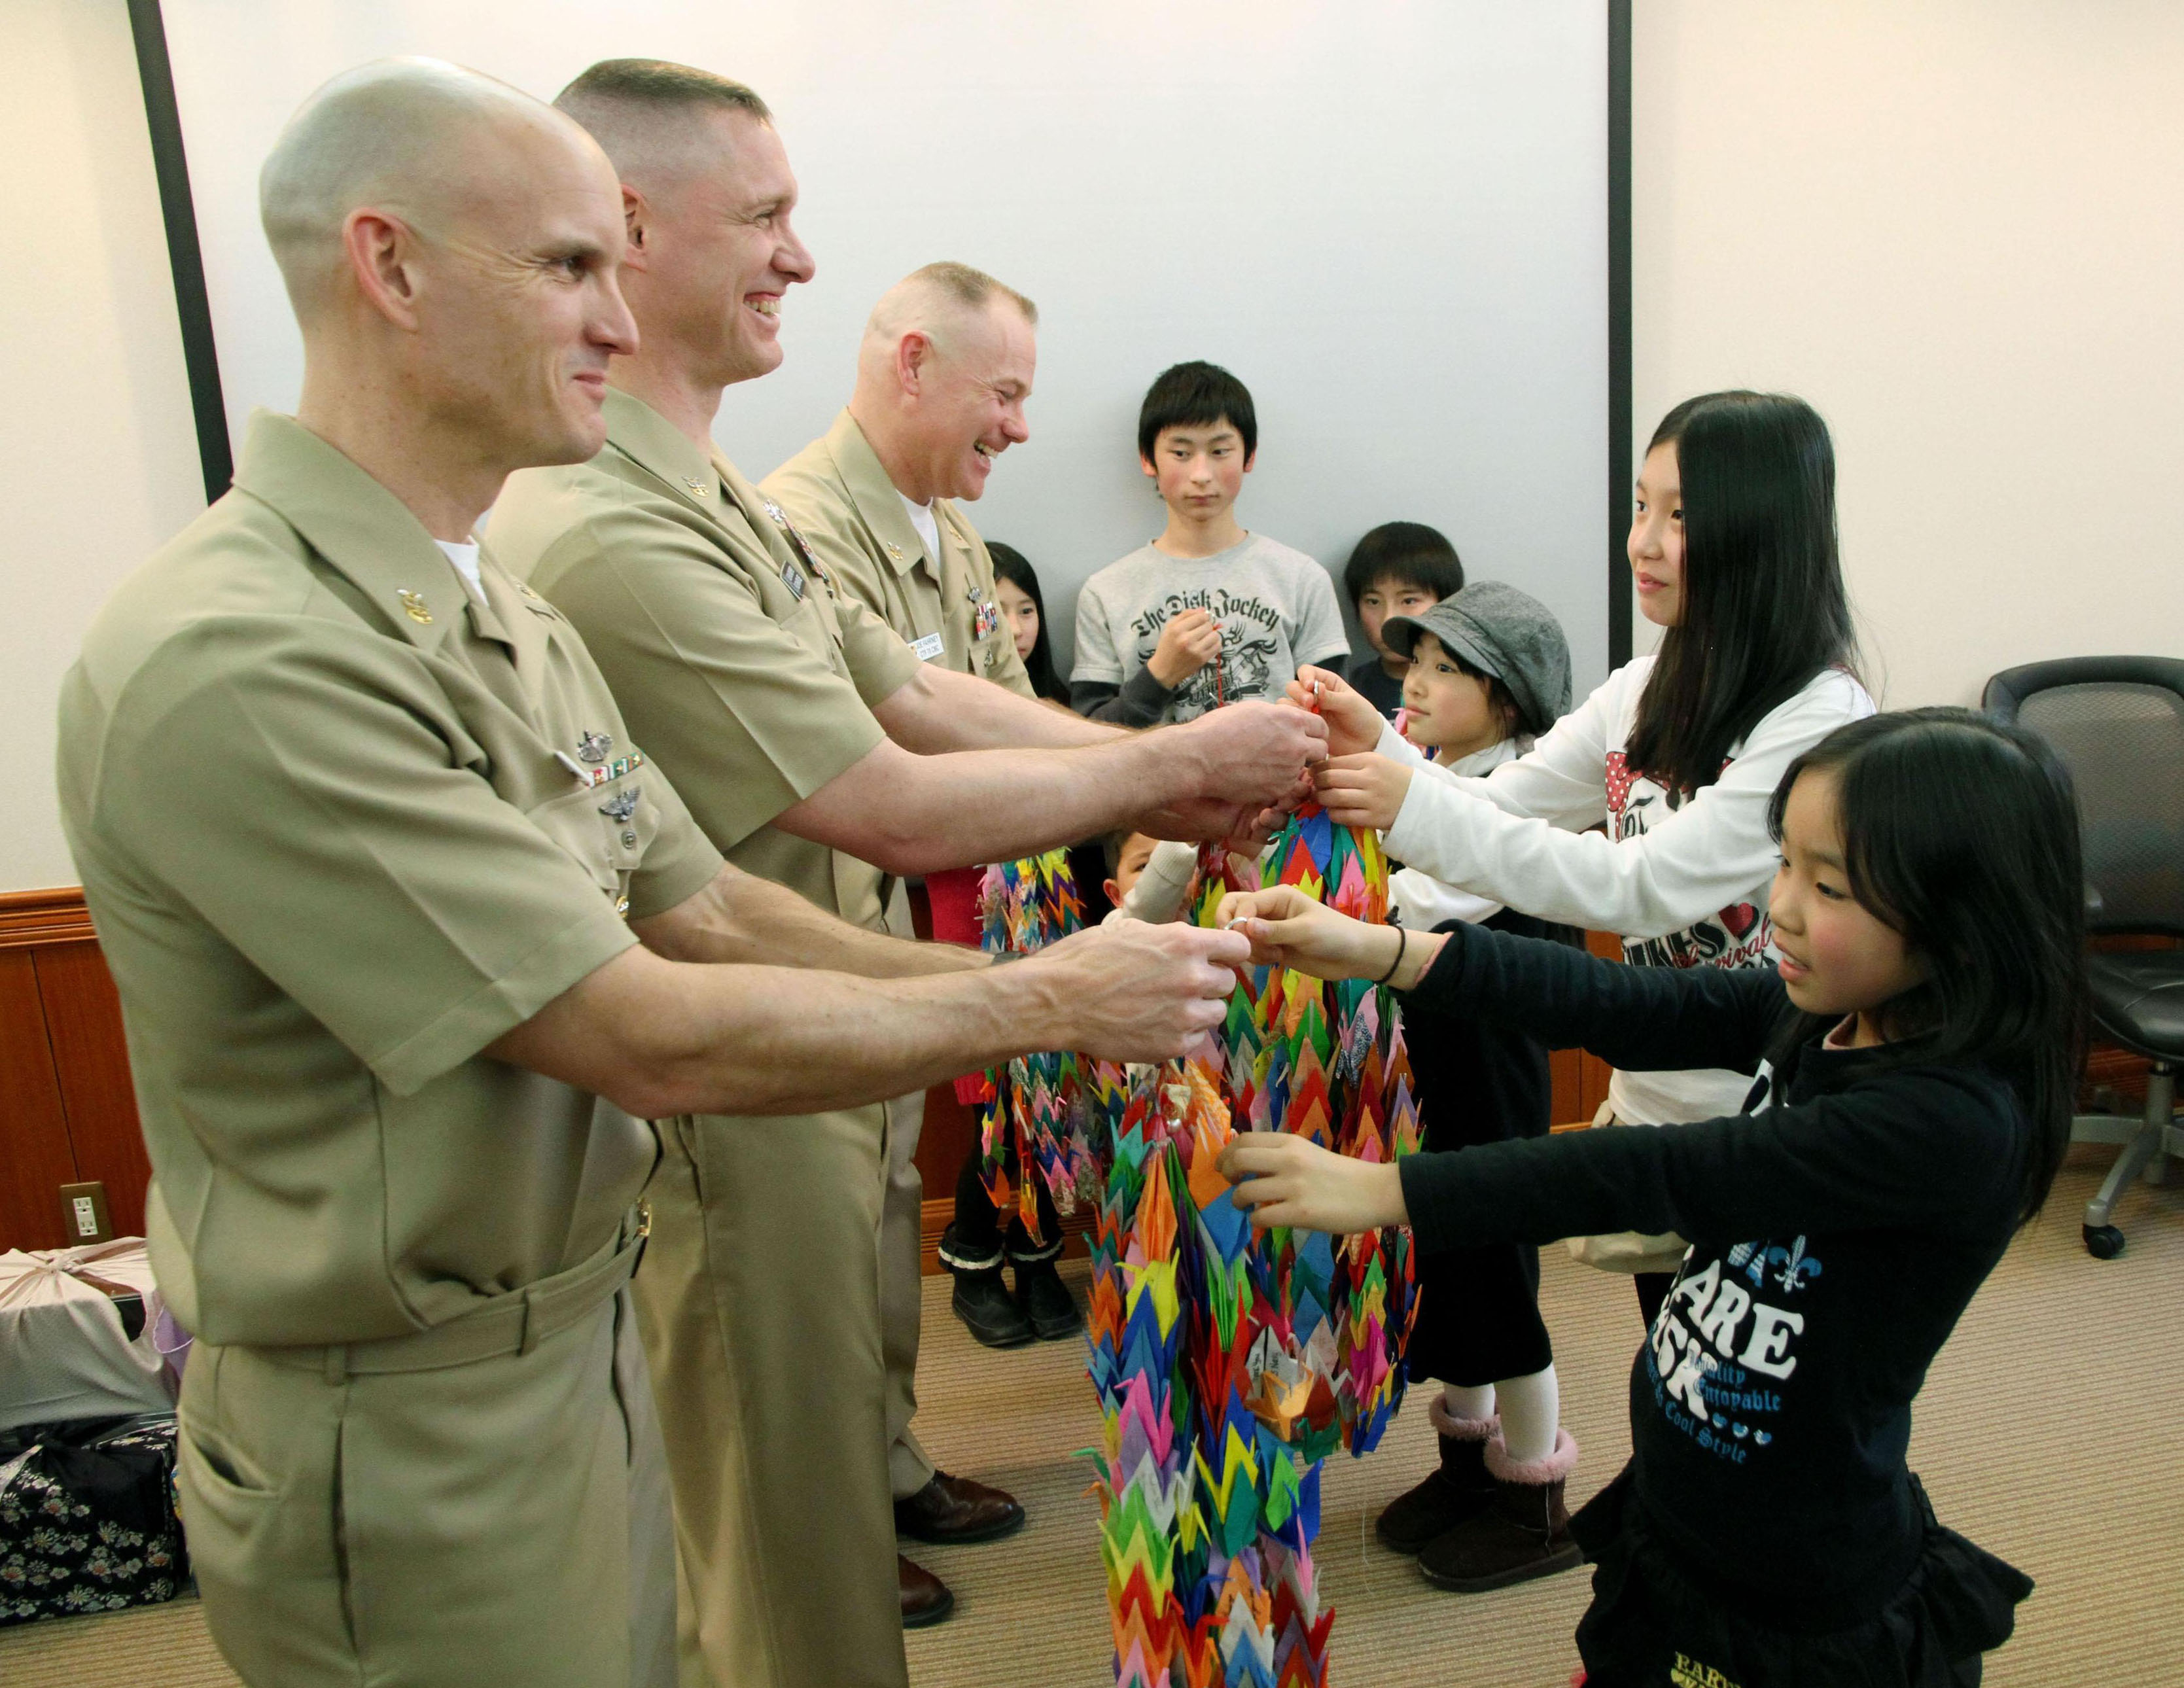 Friends: Evacuees hand paper cranes to U.S. servicemen Feb. 24 at the U.S. Navy base in Yokosuka, Kanagawa Prefecture. The cranes, made by 650 evacuees from Minamisoma, Fukushima Prefecture, contain messages of thanks for Operation Tomodachi. | KYODO